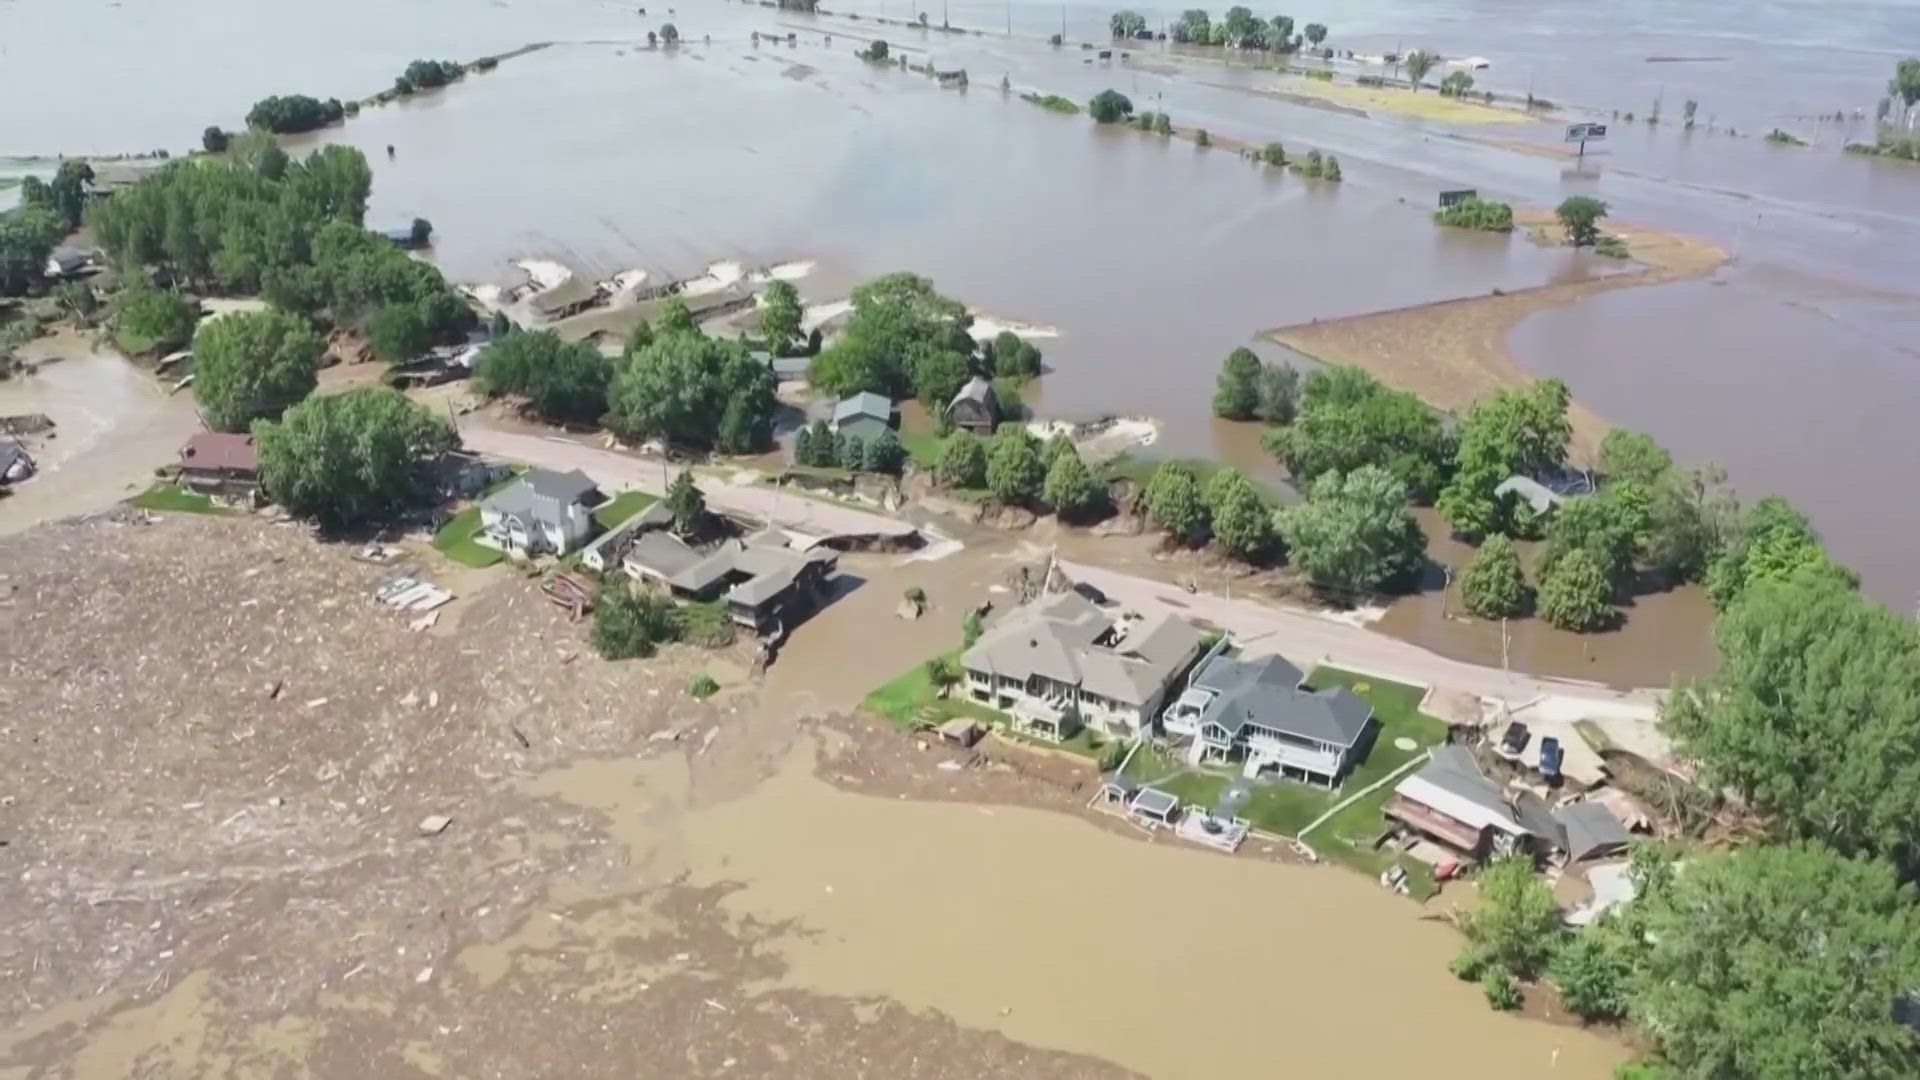 Raging rivers, collapsed roads and homes swept away. Officials say Midwest floods have now claimed two lives.